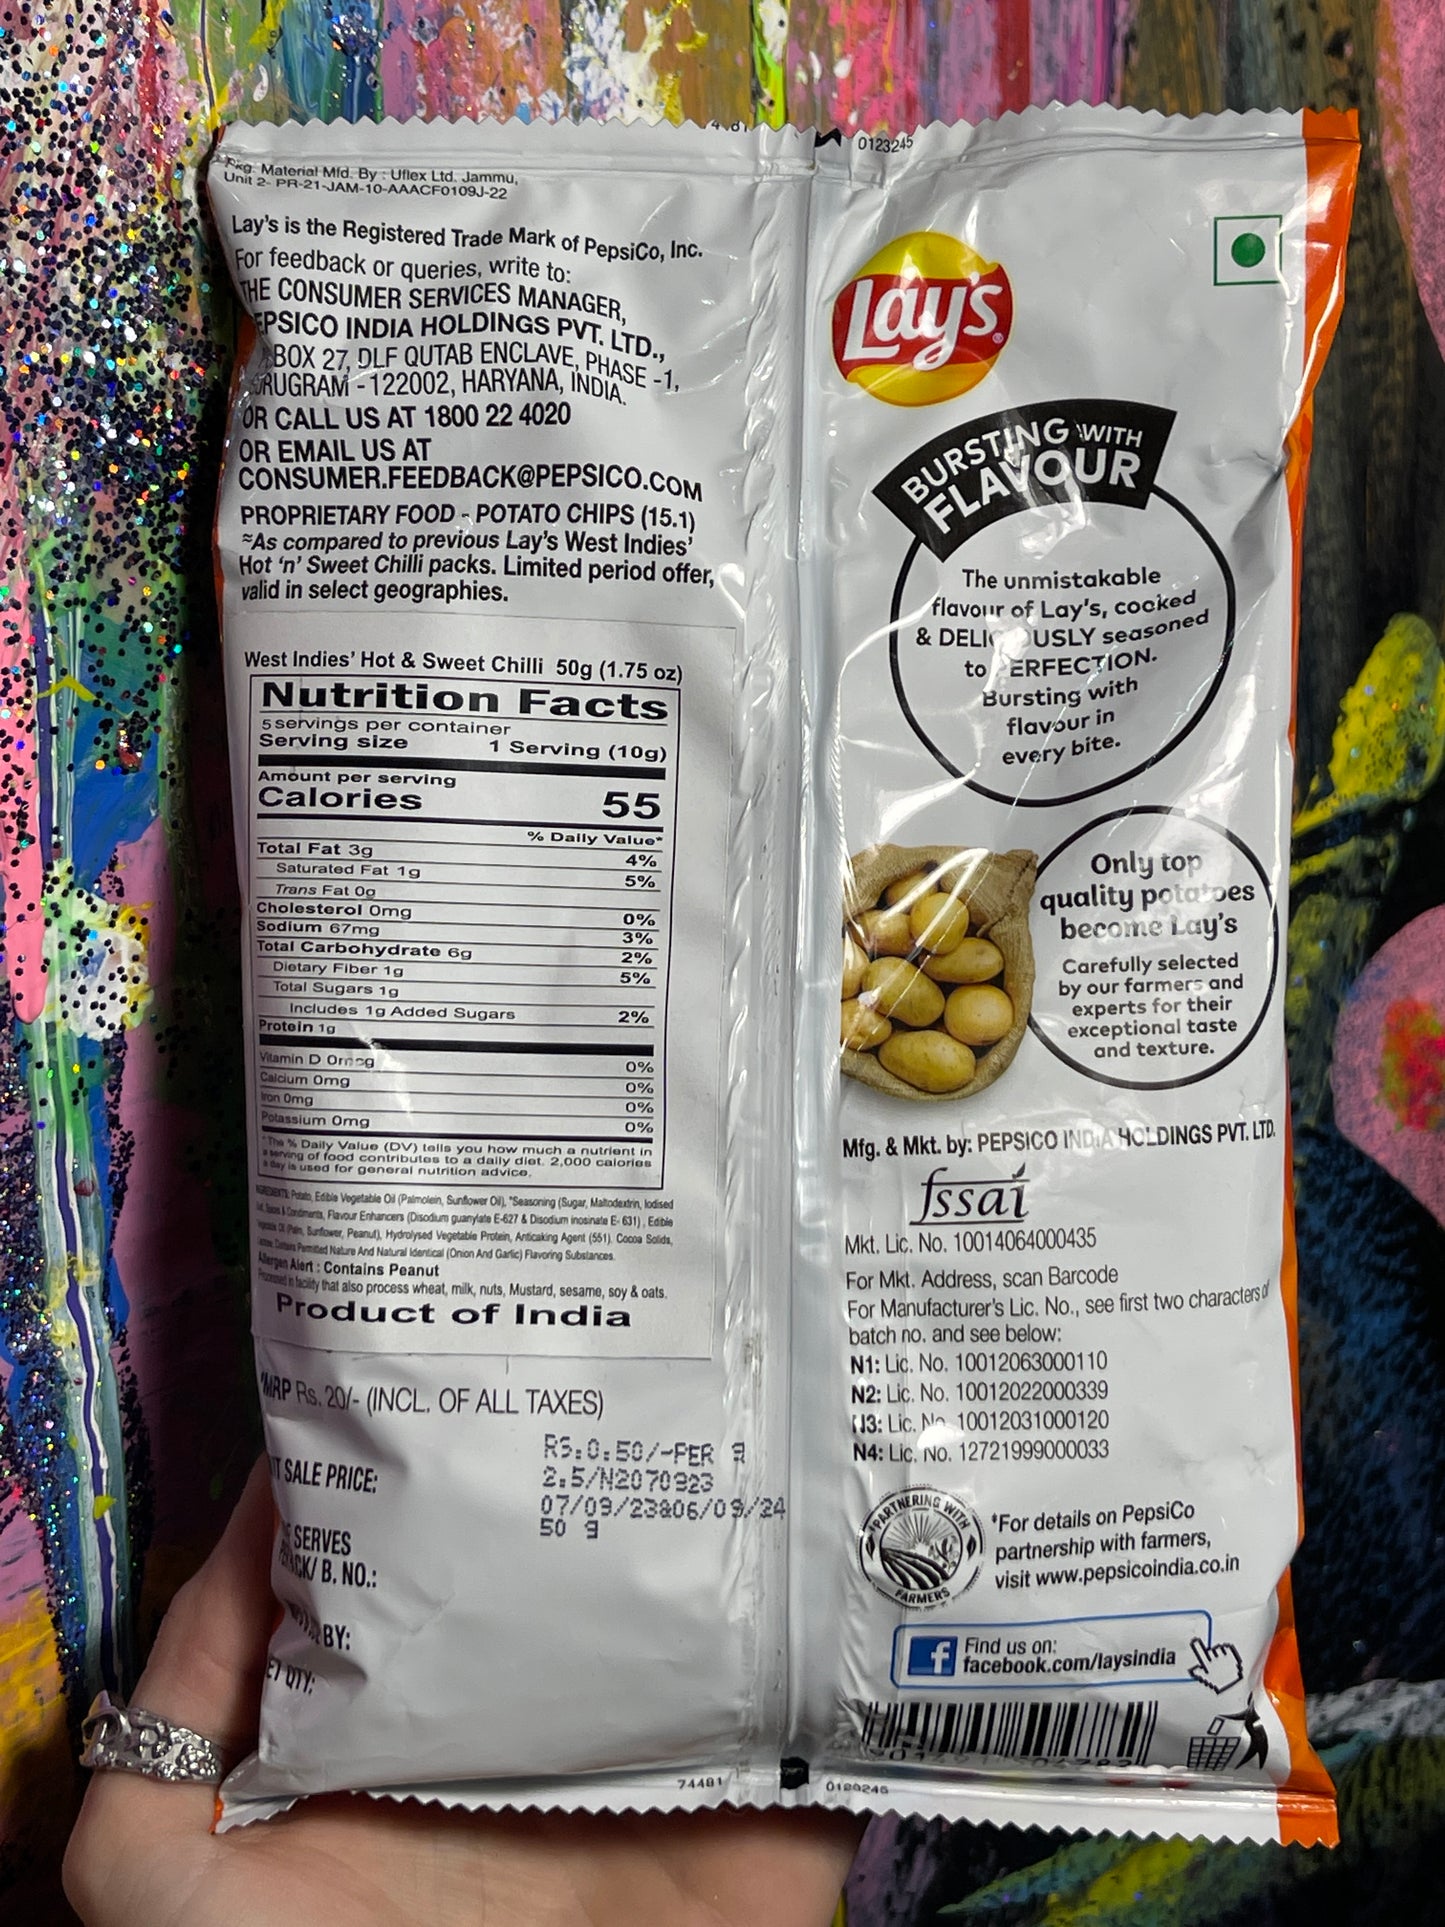 Lay's West Indies Hot ‘b’ Sweet Chili Potato Chips (India)